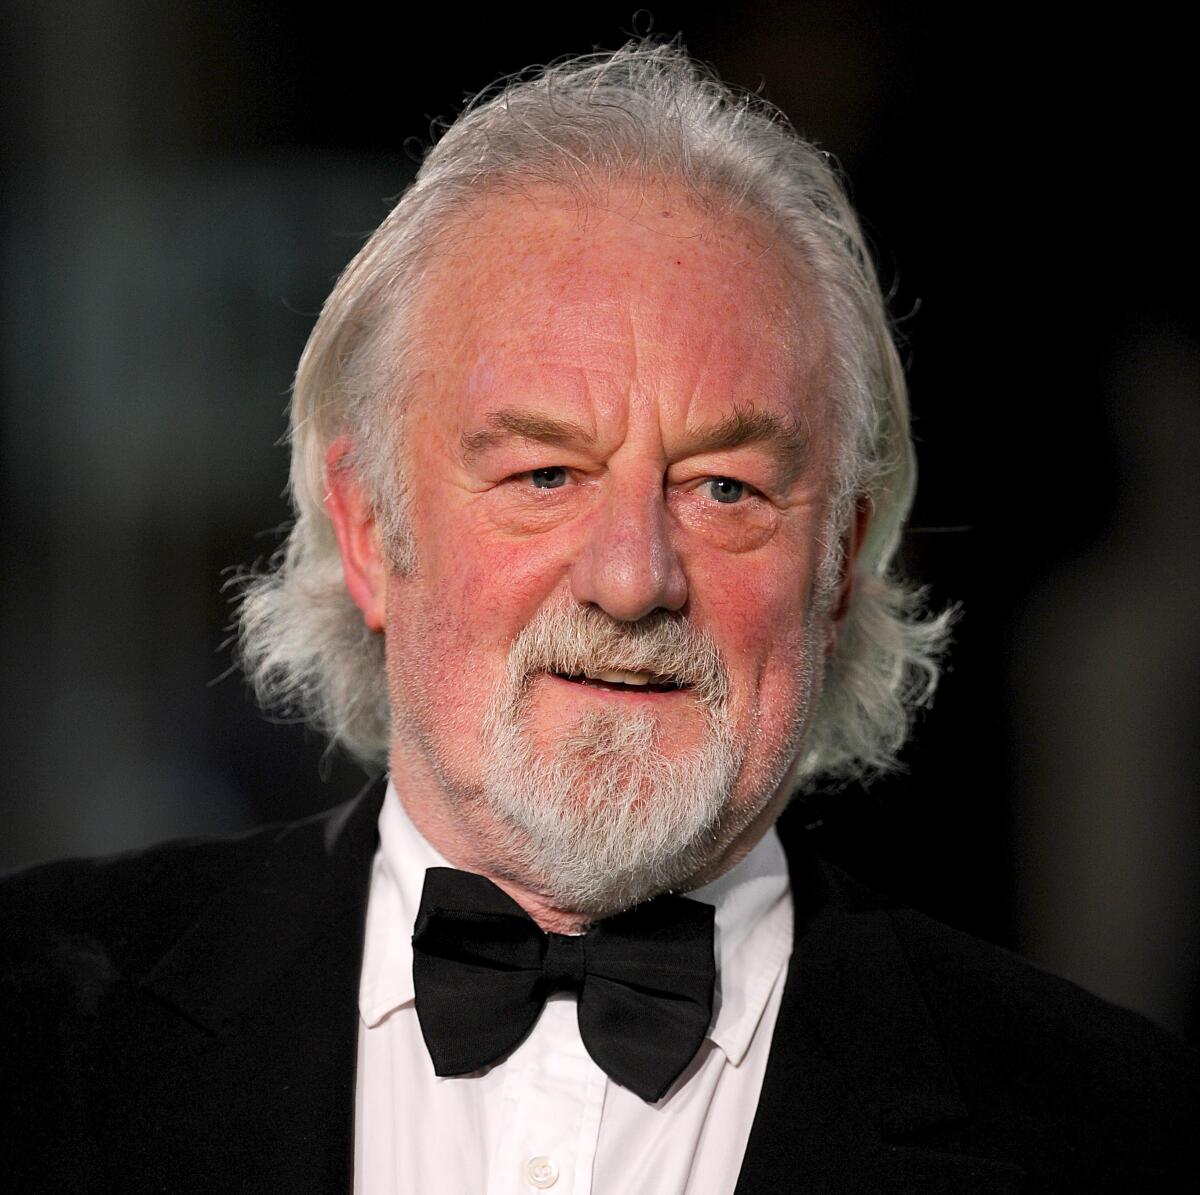 A smiling older man with gray hair, a gray beard and formal wear at a film premiere.